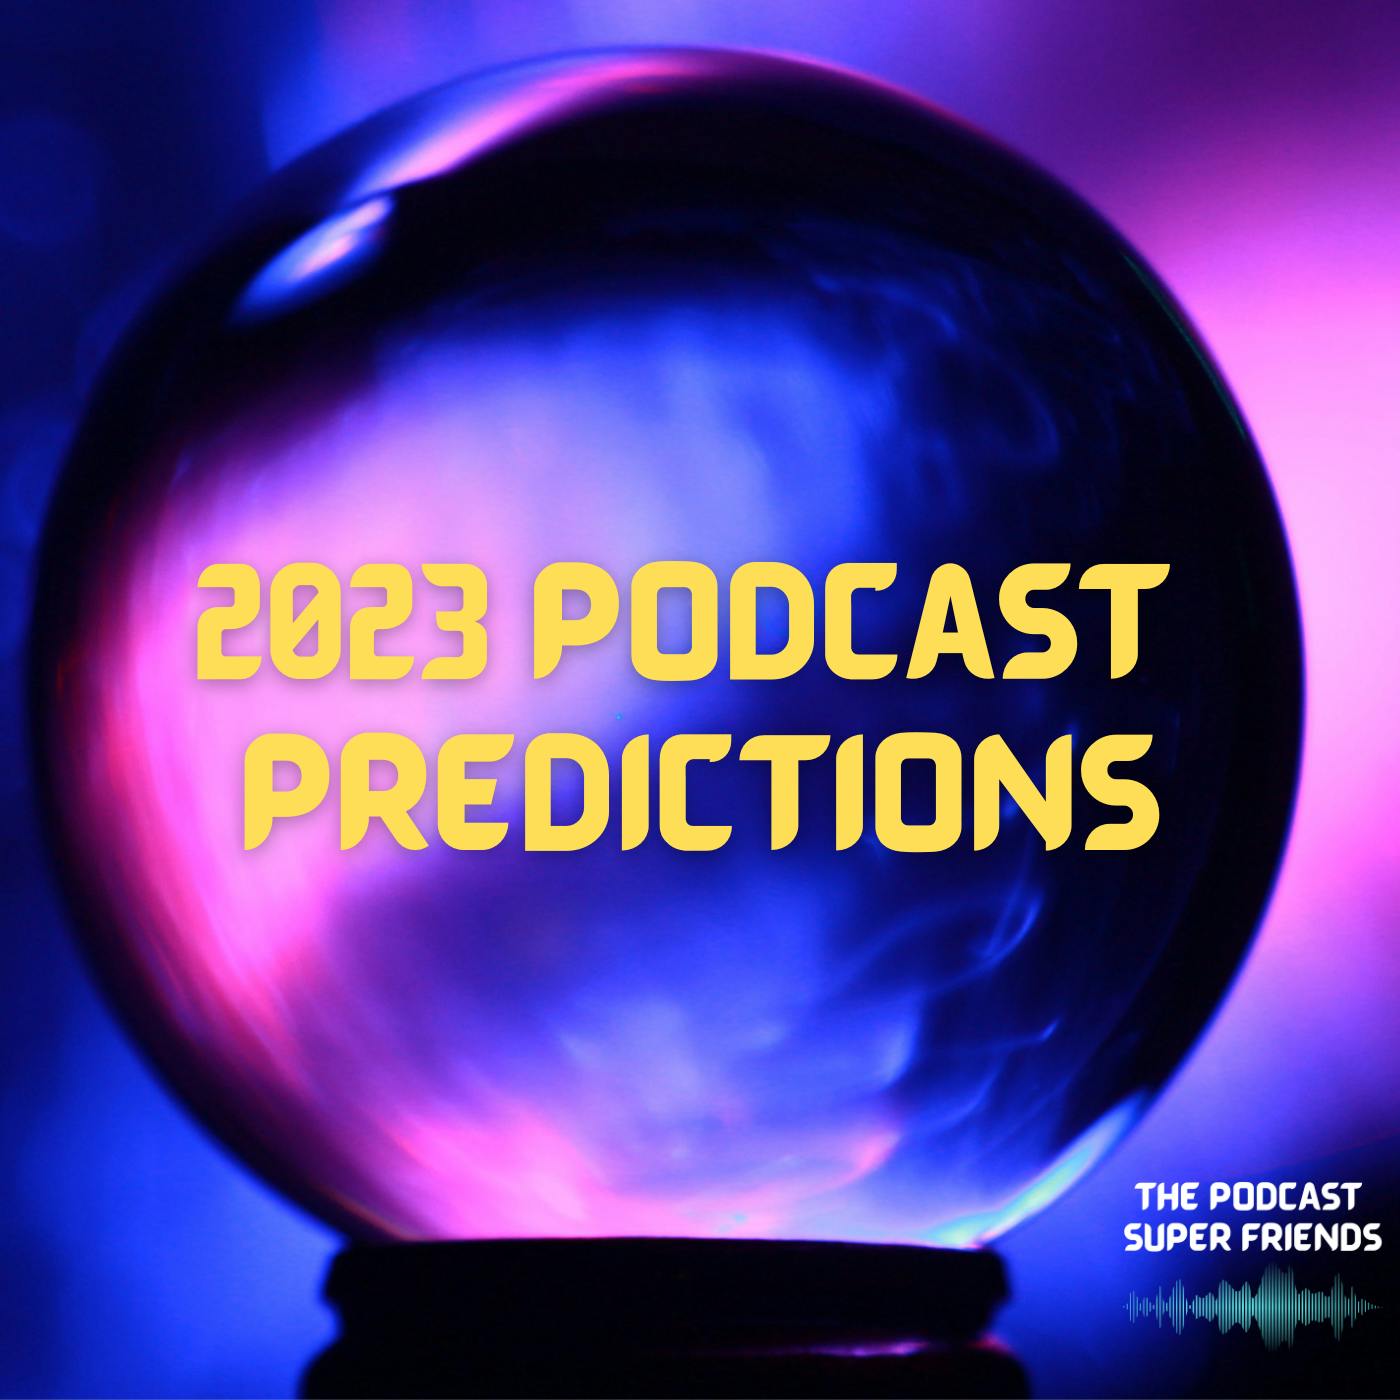 Our 2023 Podcast Predictions